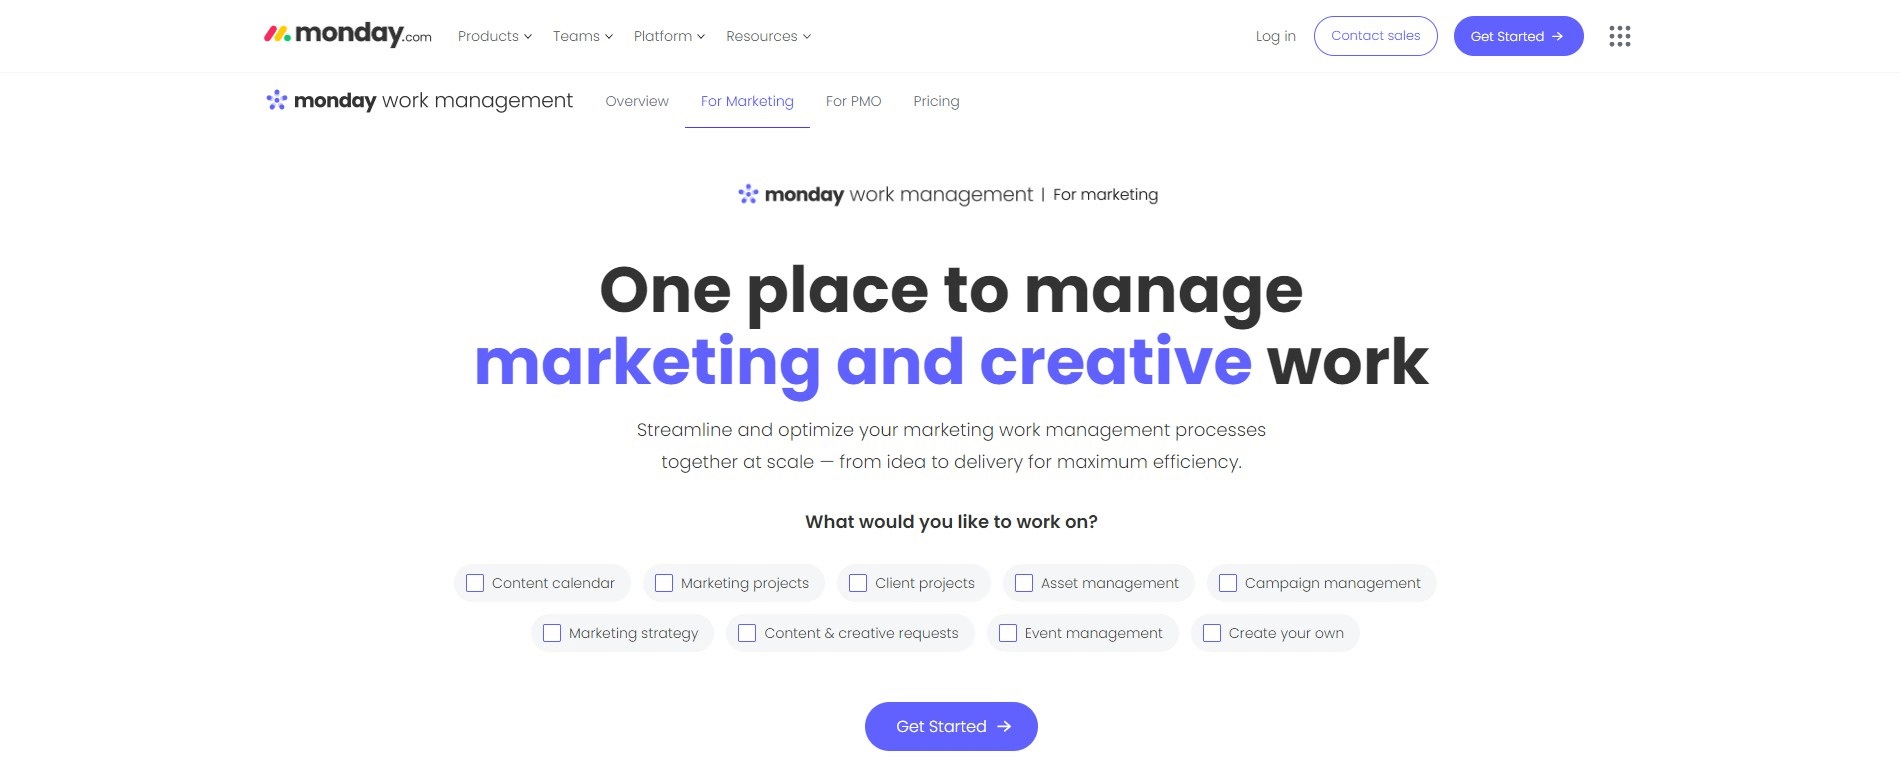 Monday.com marketing management page highlighting features for managing marketing and creative work with options for content calendar, projects, and strategy.